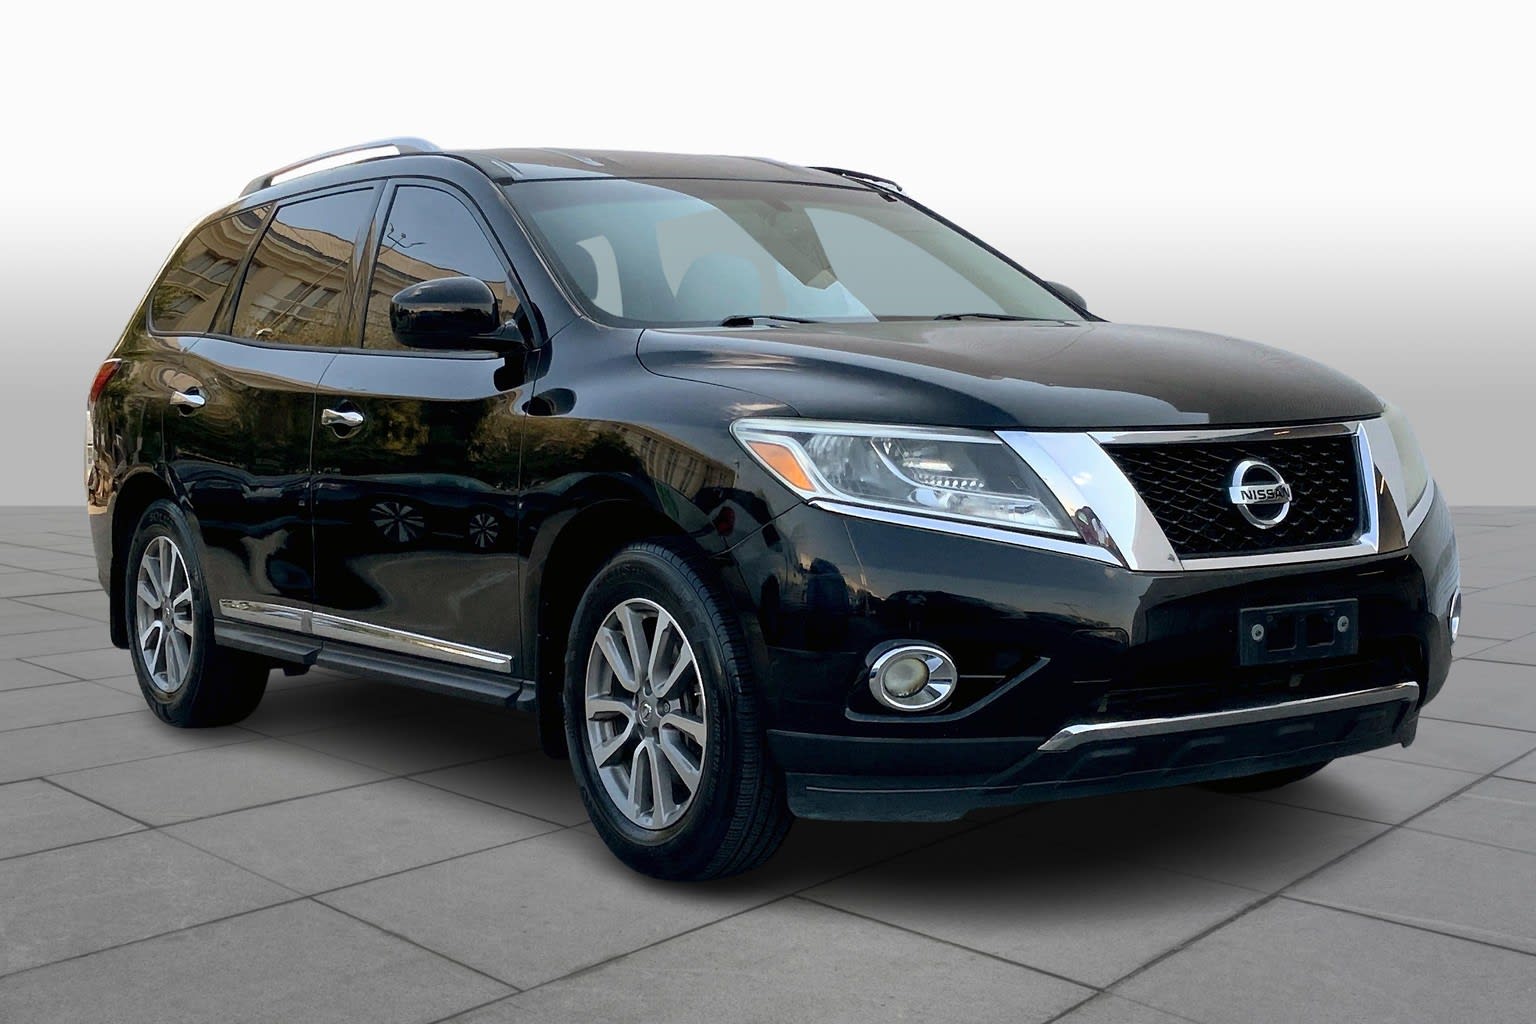 Used 2014 Nissan Pathfinder SL with VIN 5N1AR2MN0EC703983 for sale in Houston, TX